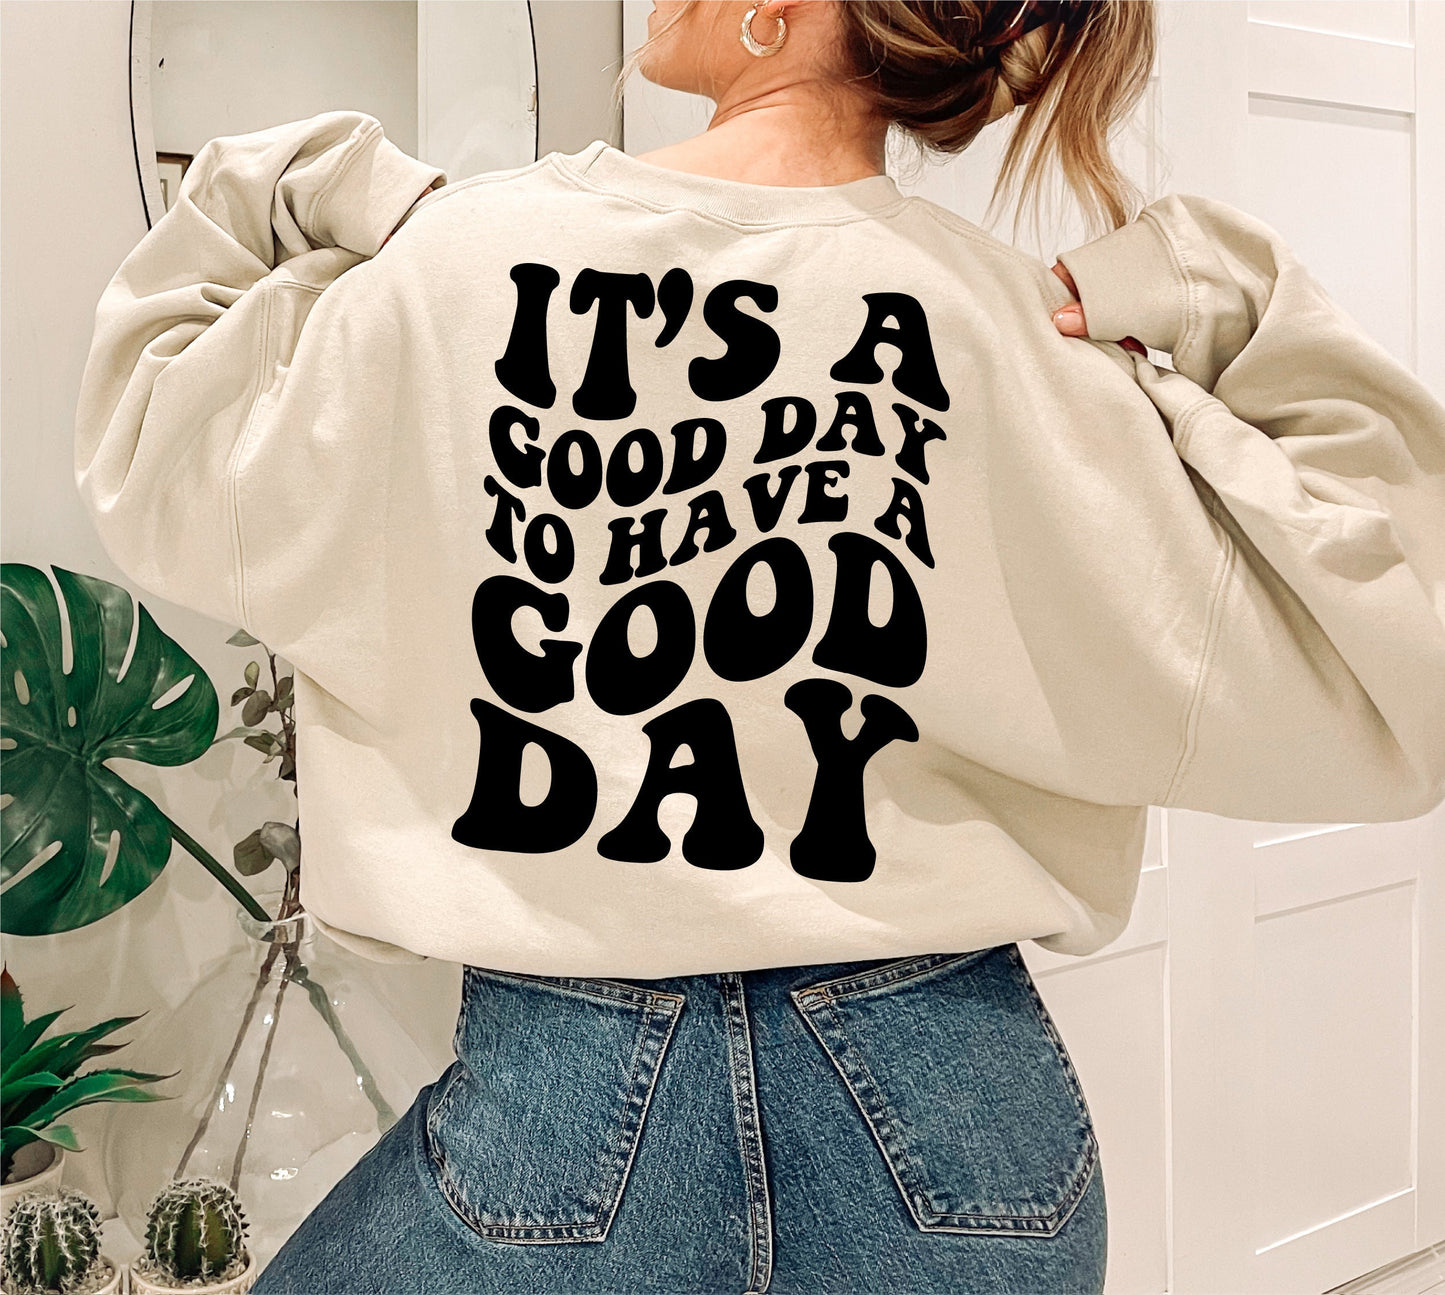 It's A Good Day To Have A Good Day svg, Good Day svg, Have a Good Day svg, Wavy Letters, Digital Design